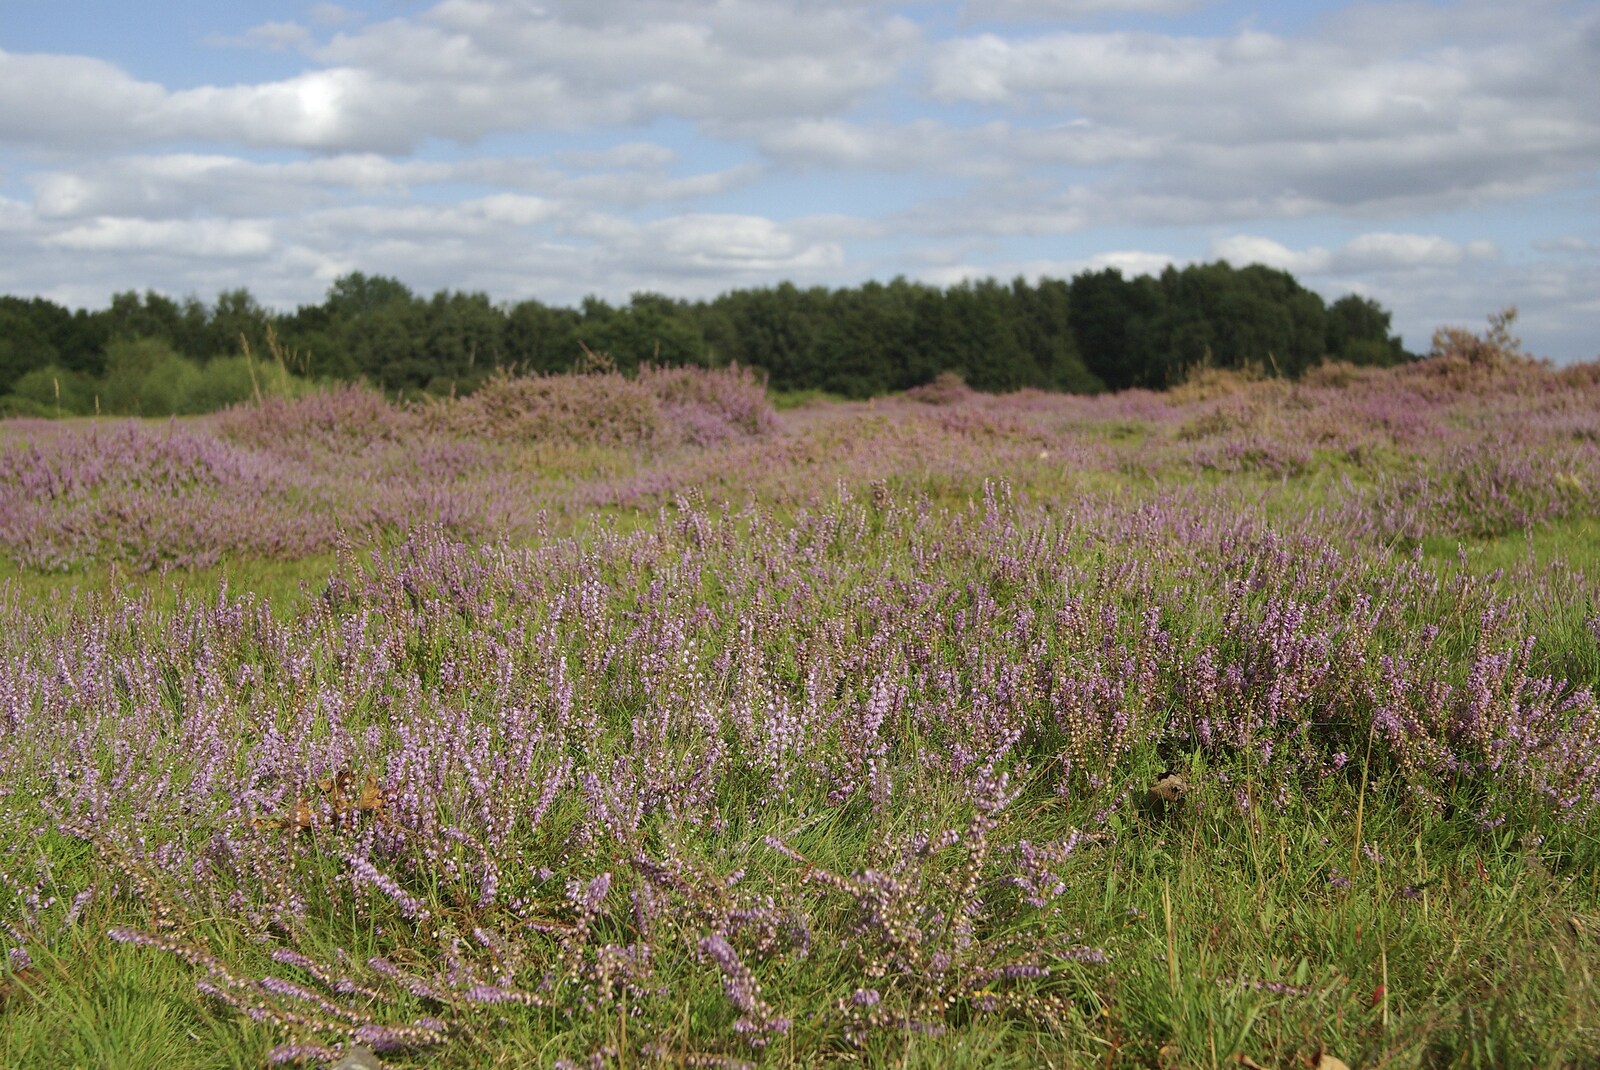 More purple heather from A Picnic on The Ling, Wortham, Suffolk - 26th August 2007